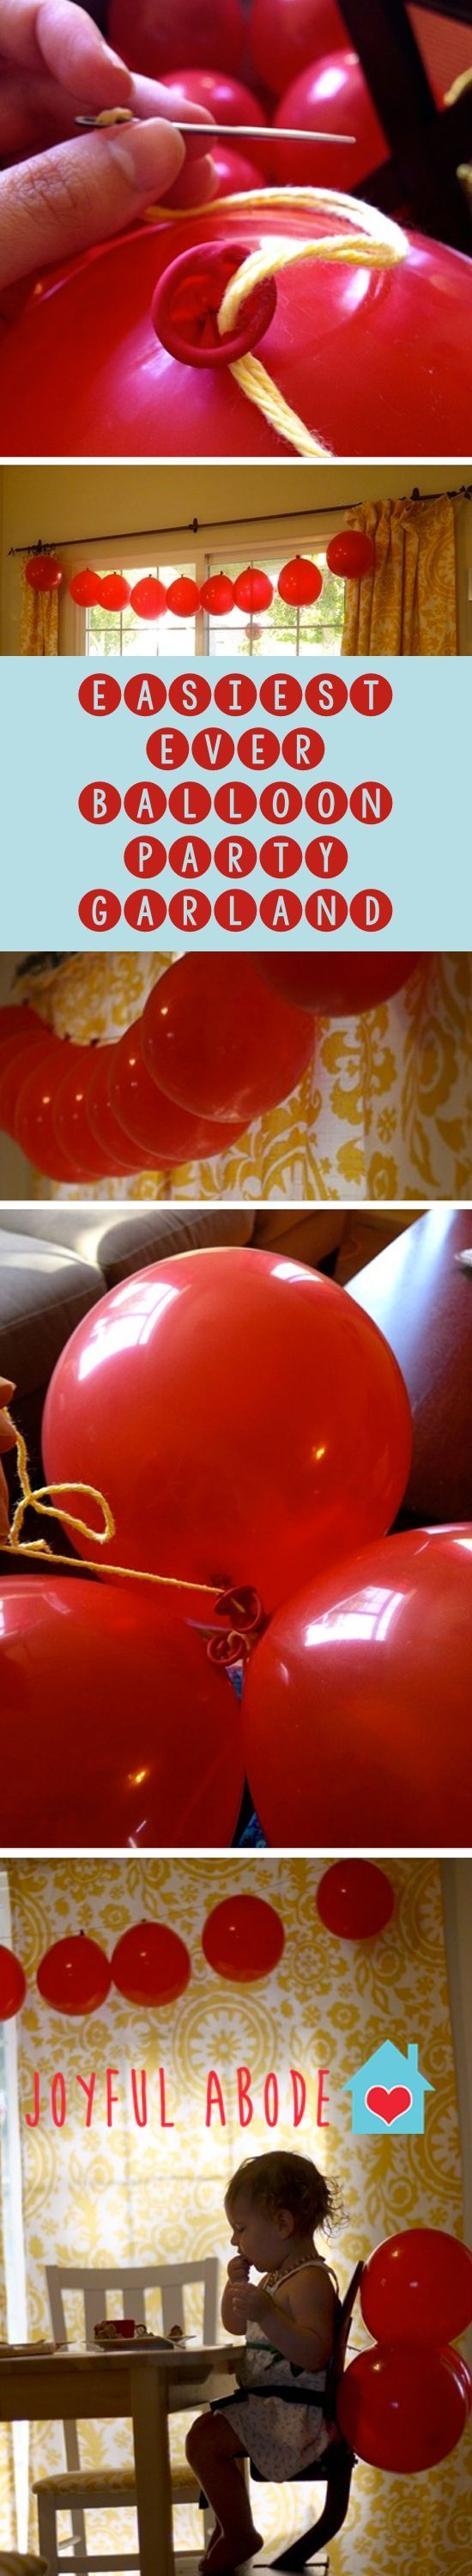 easiest EVER balloon party garland. Make garlands to hang, or bunches to decorate with.